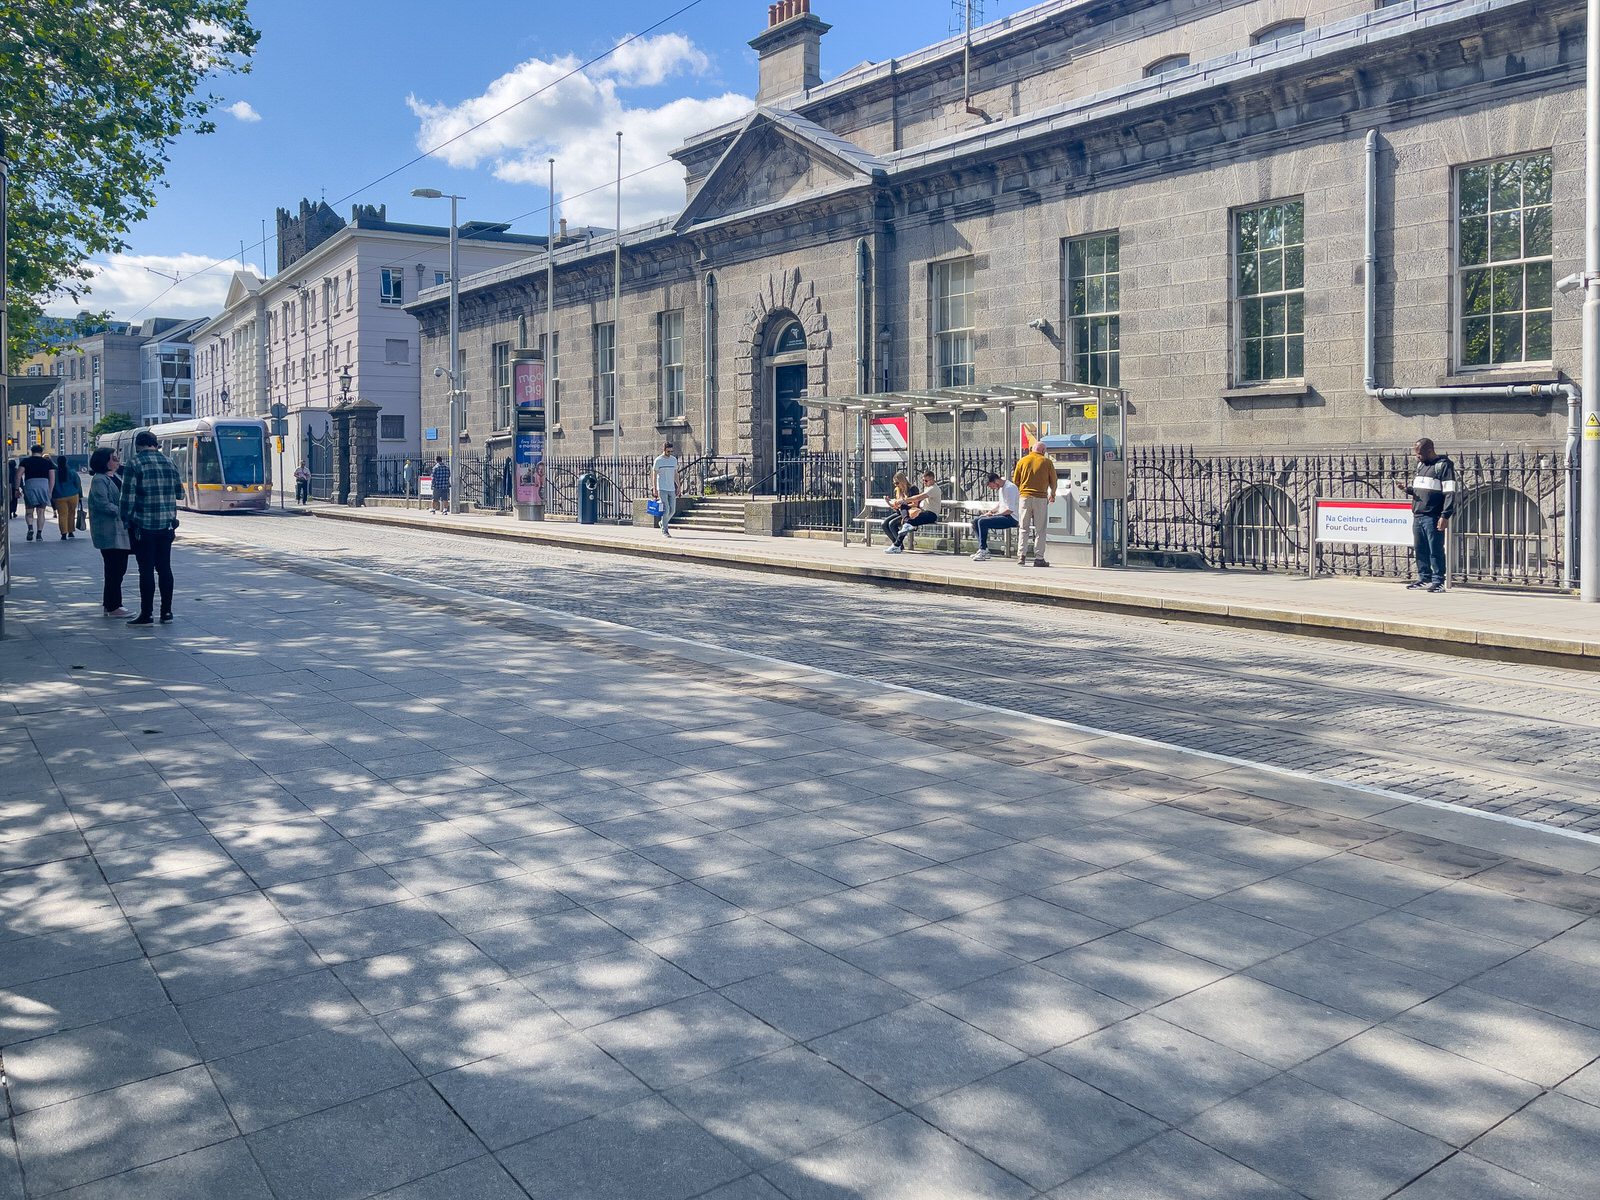 THE LUAS FOUR COURTS TRAM STOP [THERE IS MUCH TO BE SEEN HERE]-234098-1